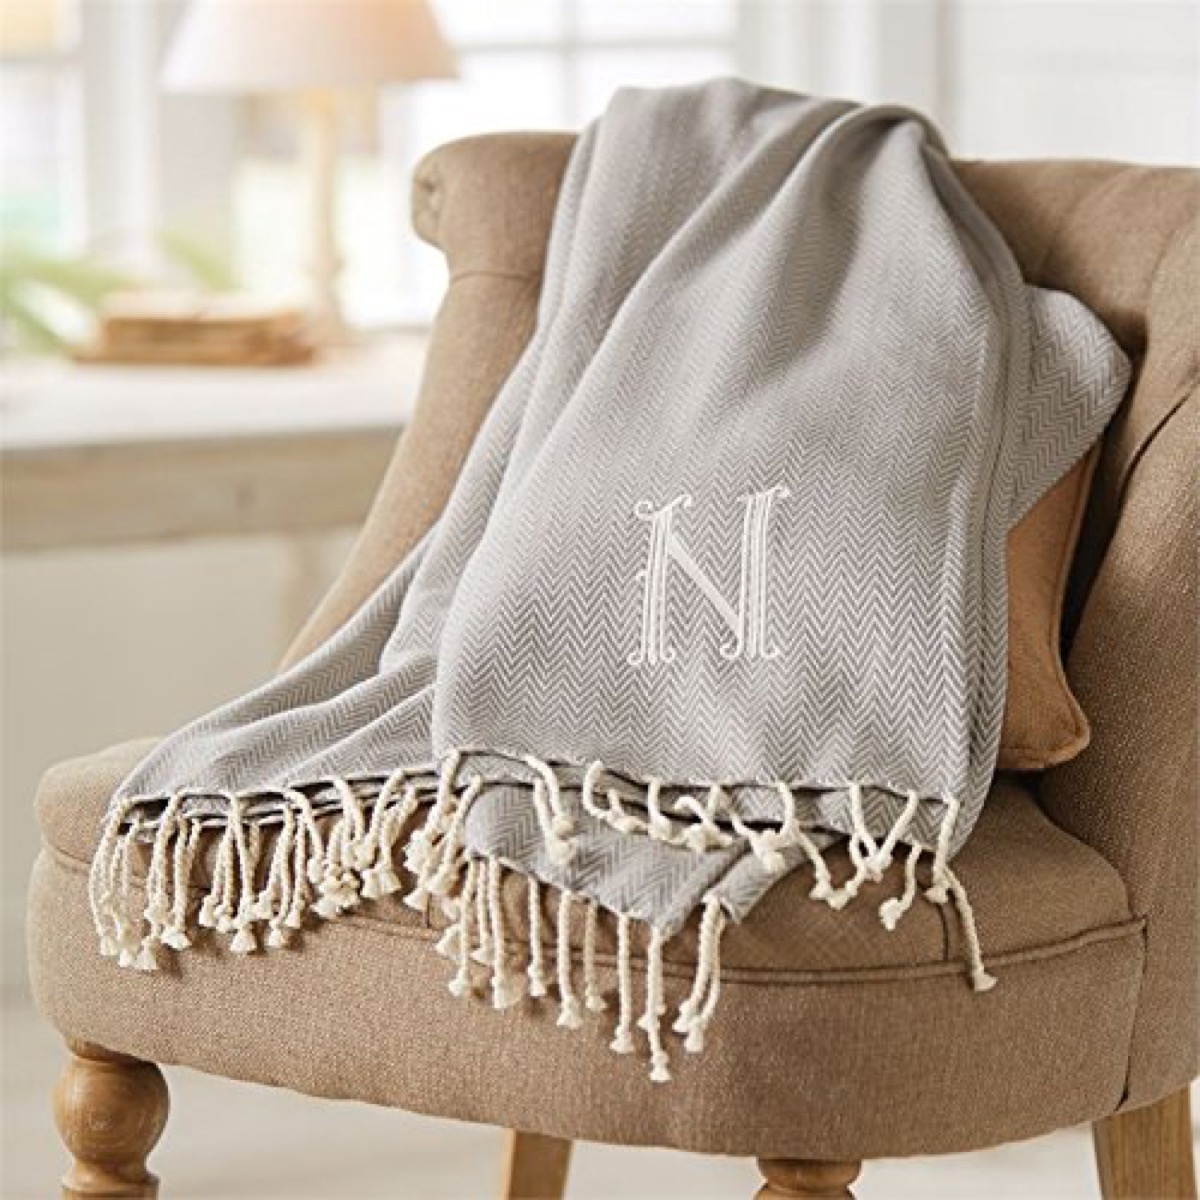 gray throw blanket with monogrammed N and white fringe on brown chair